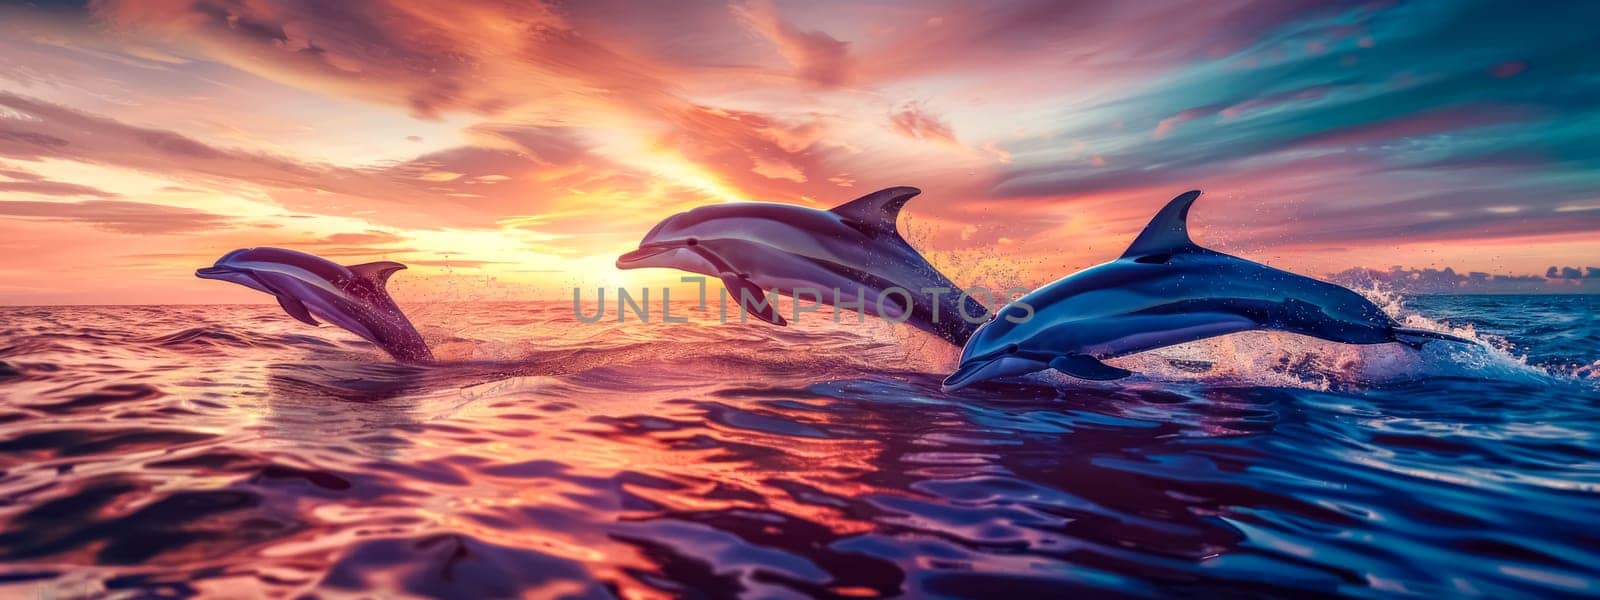 Trio of dolphins is captured mid-jump above the ocean waves at sunset, with vibrant sky colors